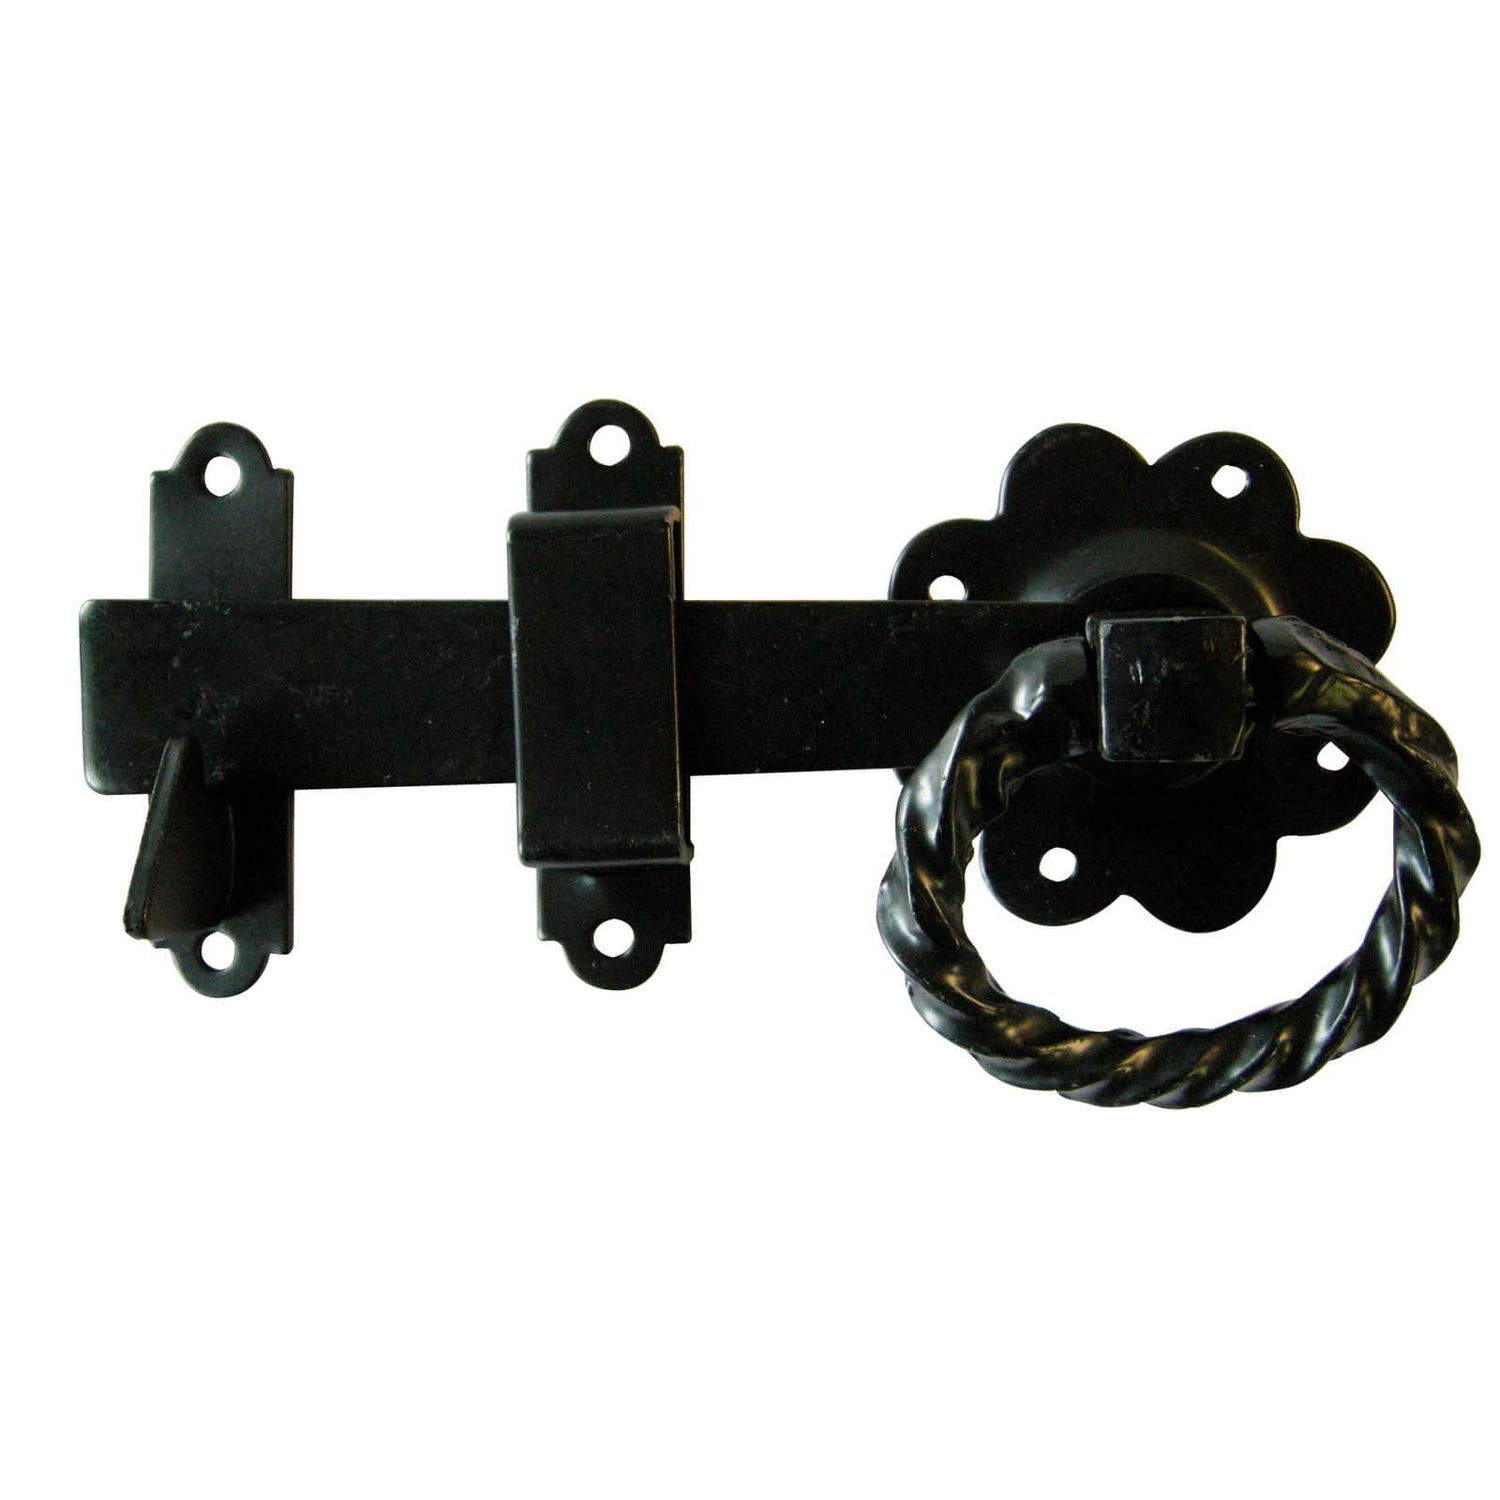 Twisted Heavy Ring Gate Latch Antique Black